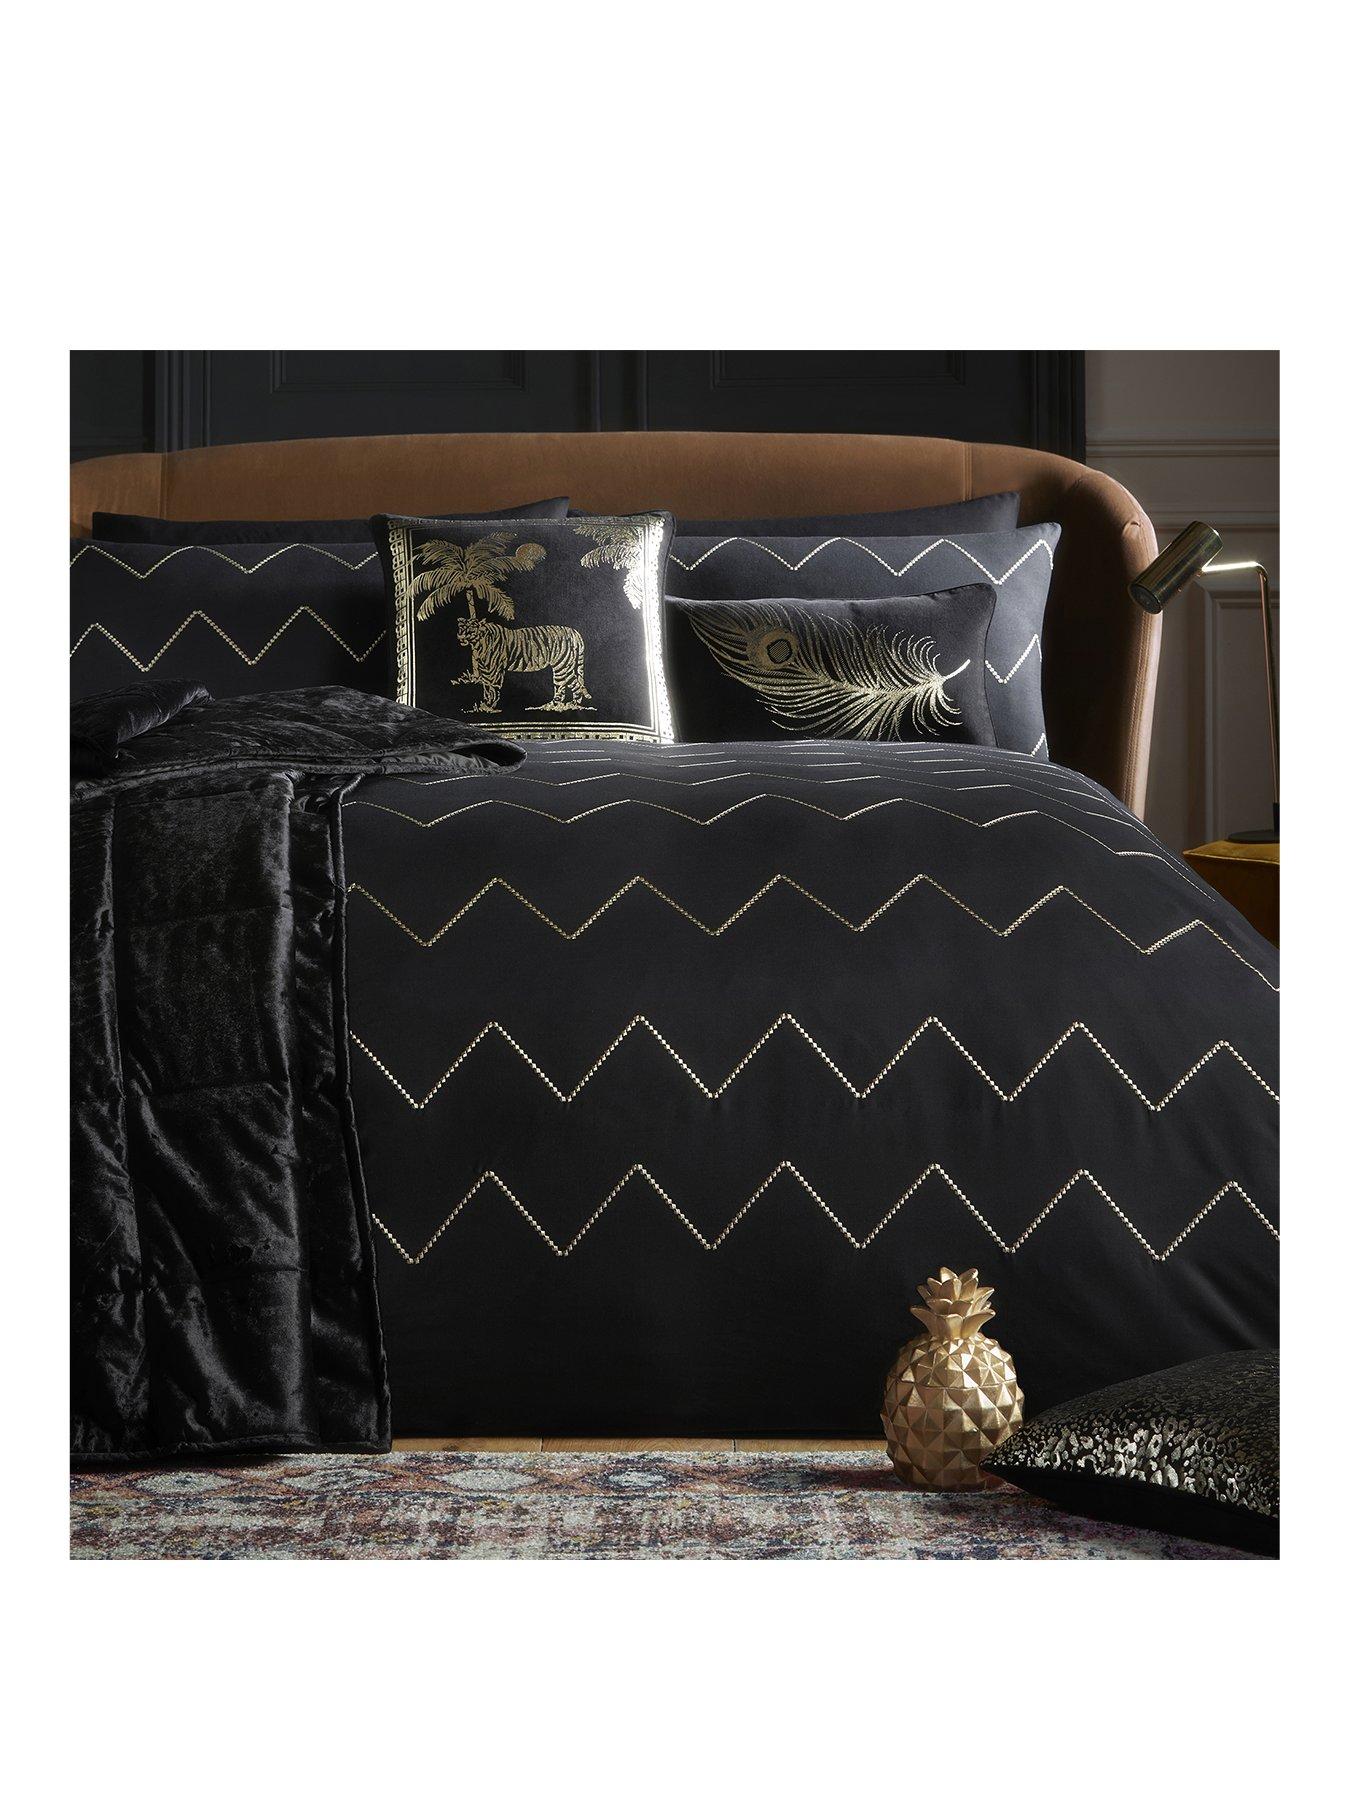 Black Double 4ft 6in Patterned Bedroom Duvet Covers